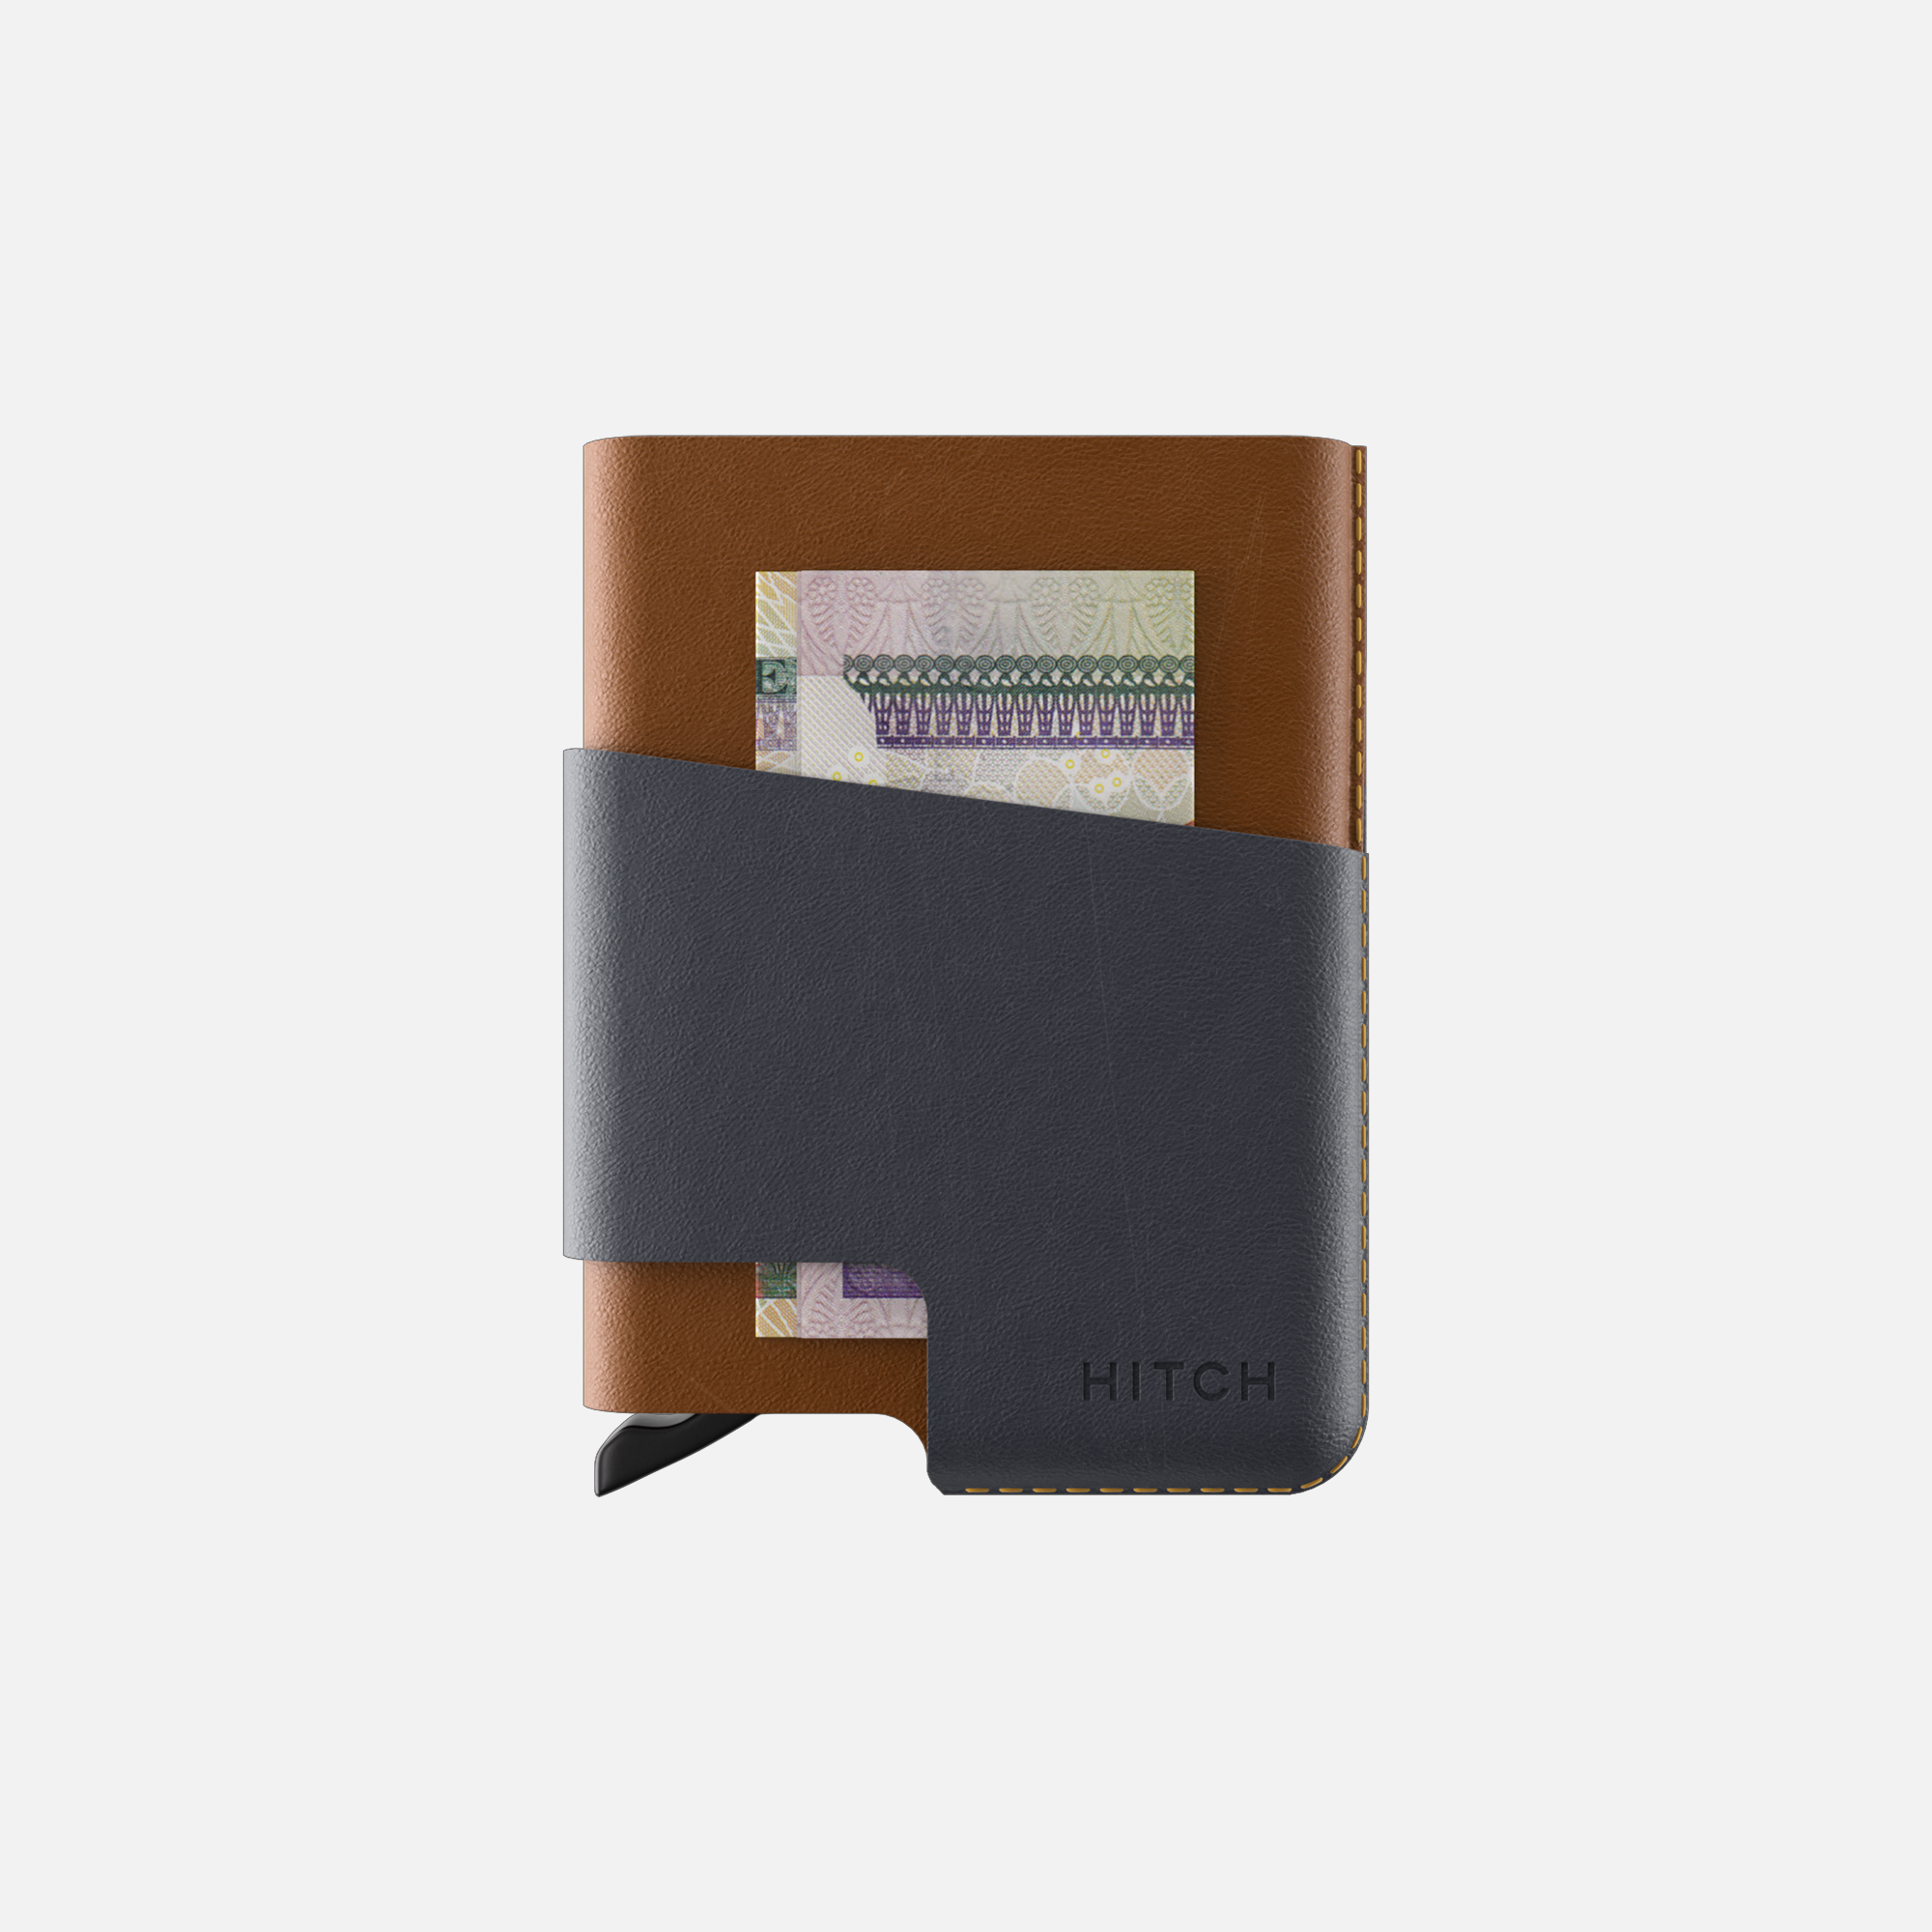 Brown and black leather cardholder wallet with money tucked inside, isolated on white background.